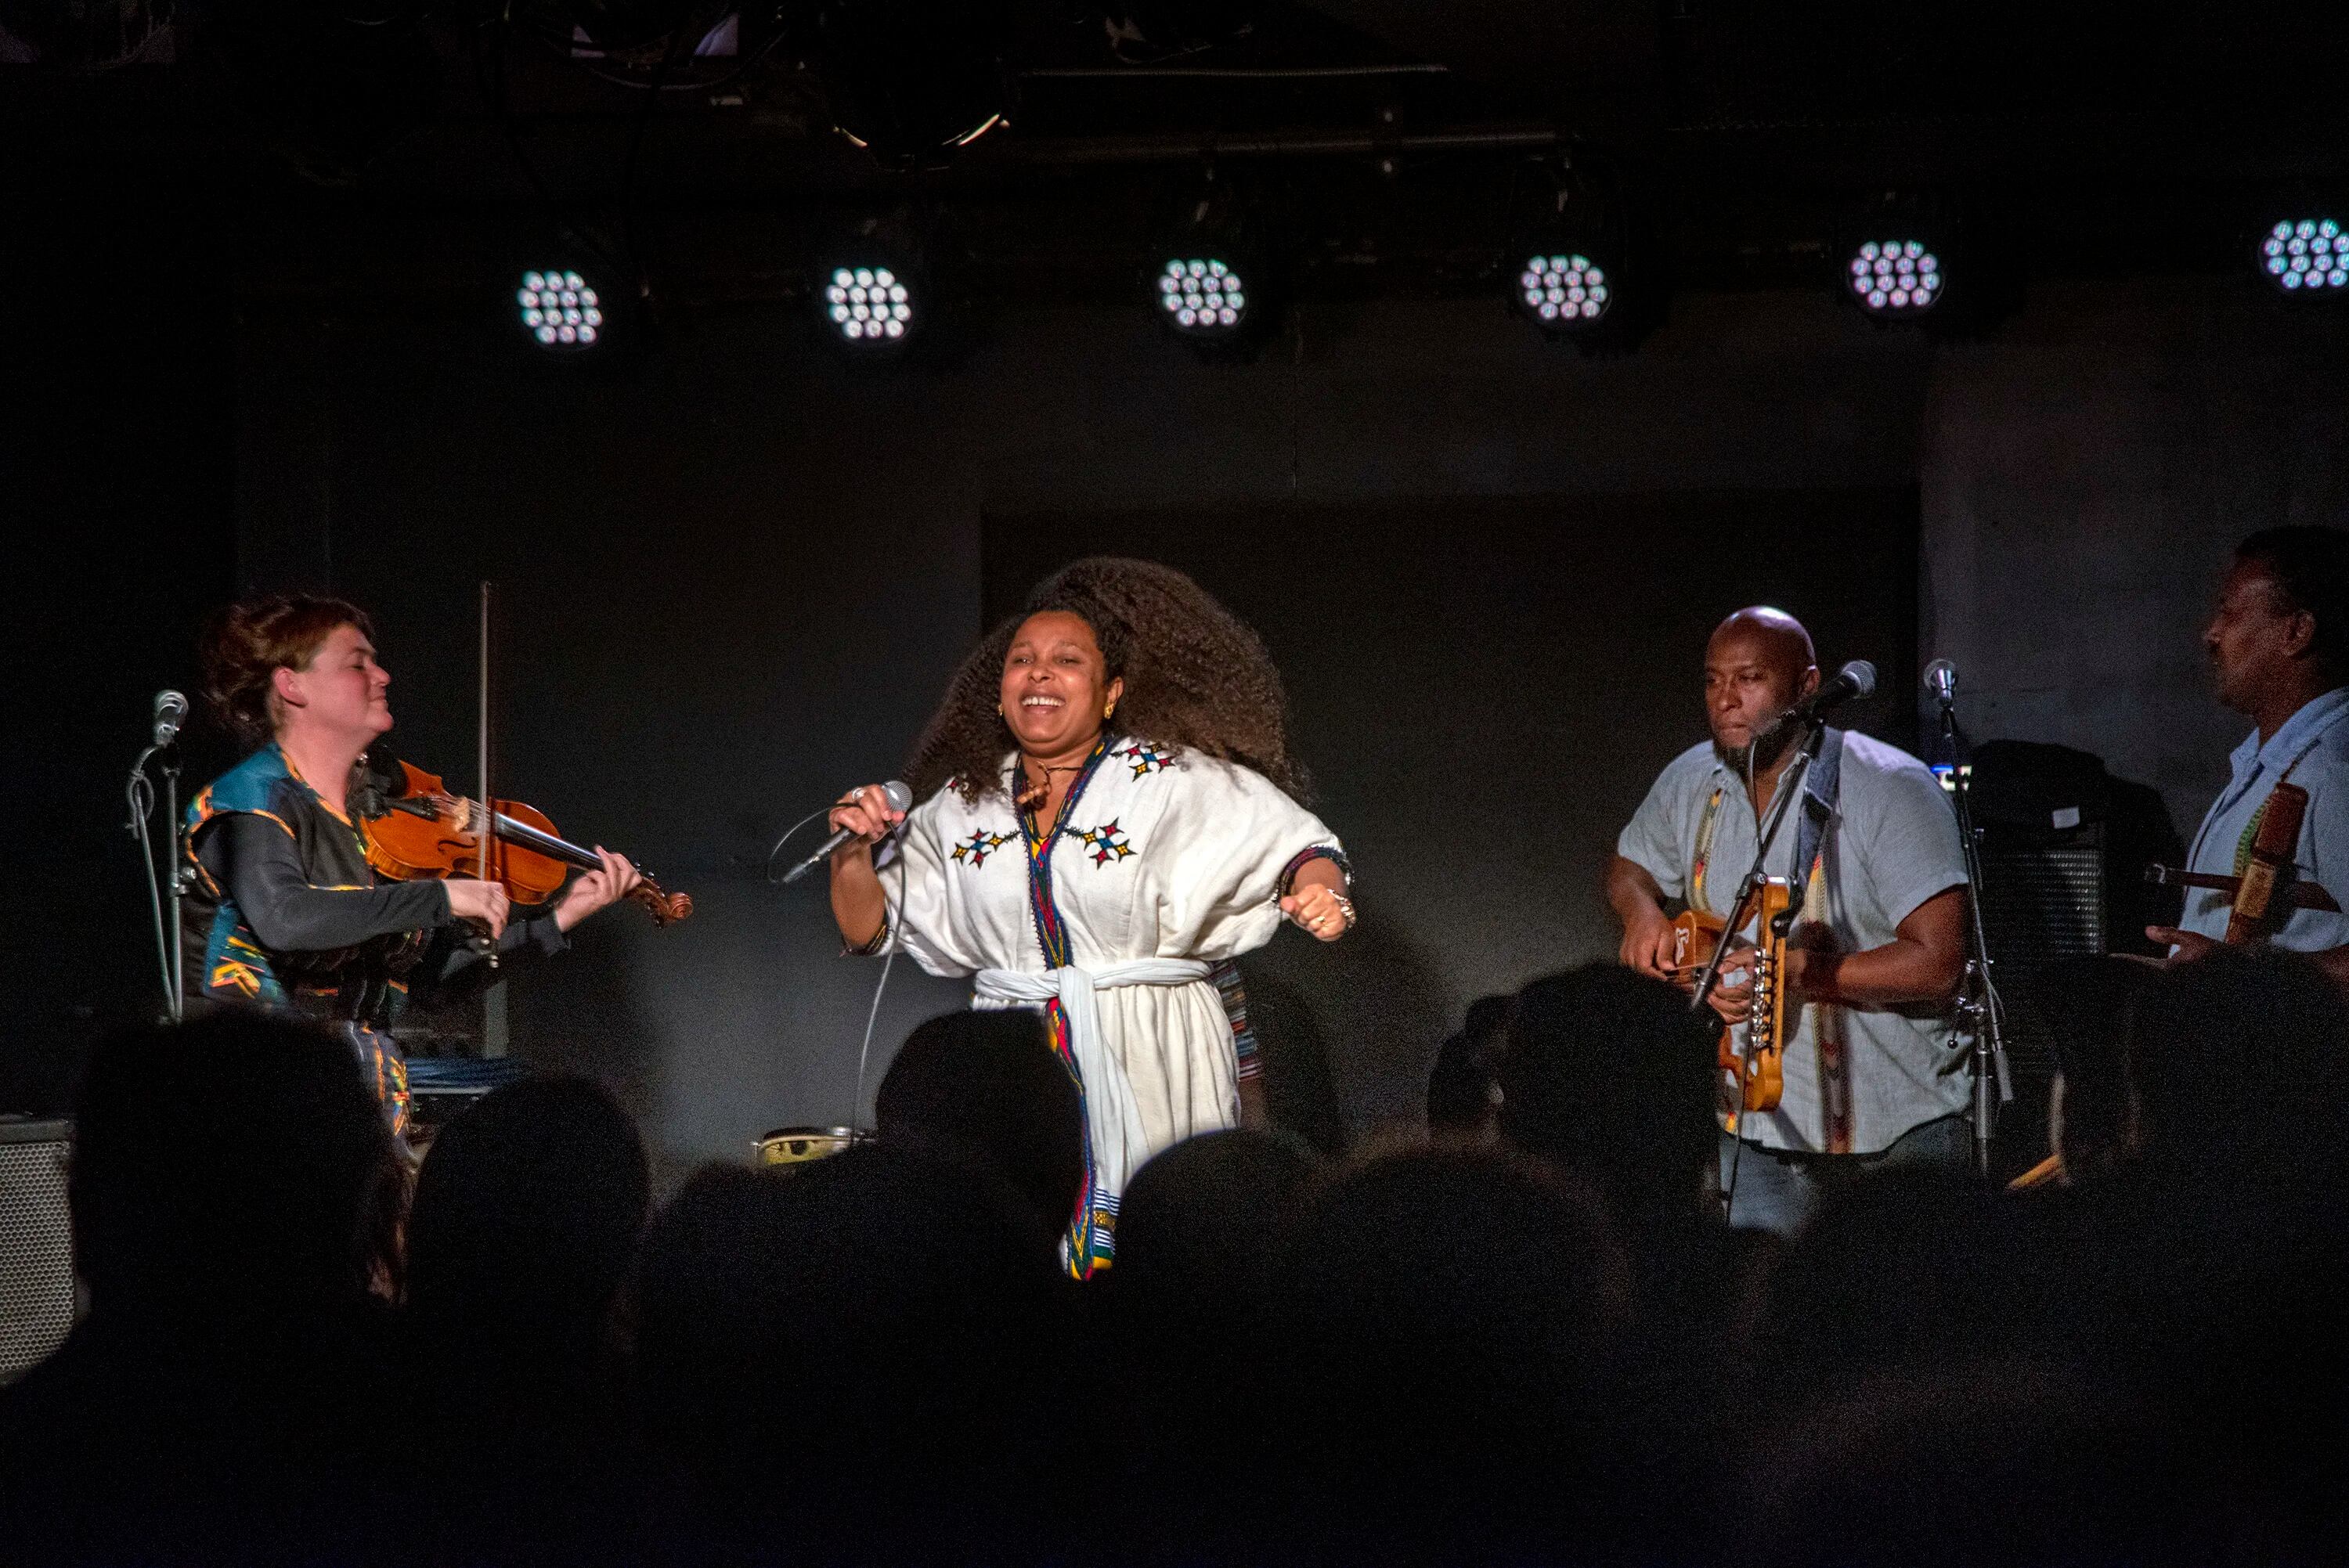 The Ethiopian band QWANQWA on stage at Solar Myth at Boot & Saddle on South Broad Street Tuesday night. Nov. 15, 2022. From left are violinist Kaethe Hostetter; vocalist Selamnesh Zemene; Bubu Teklemariam, playing the bass krar; and Endris Hassen on mesenko. Drummer Misale Legesse is not shown.